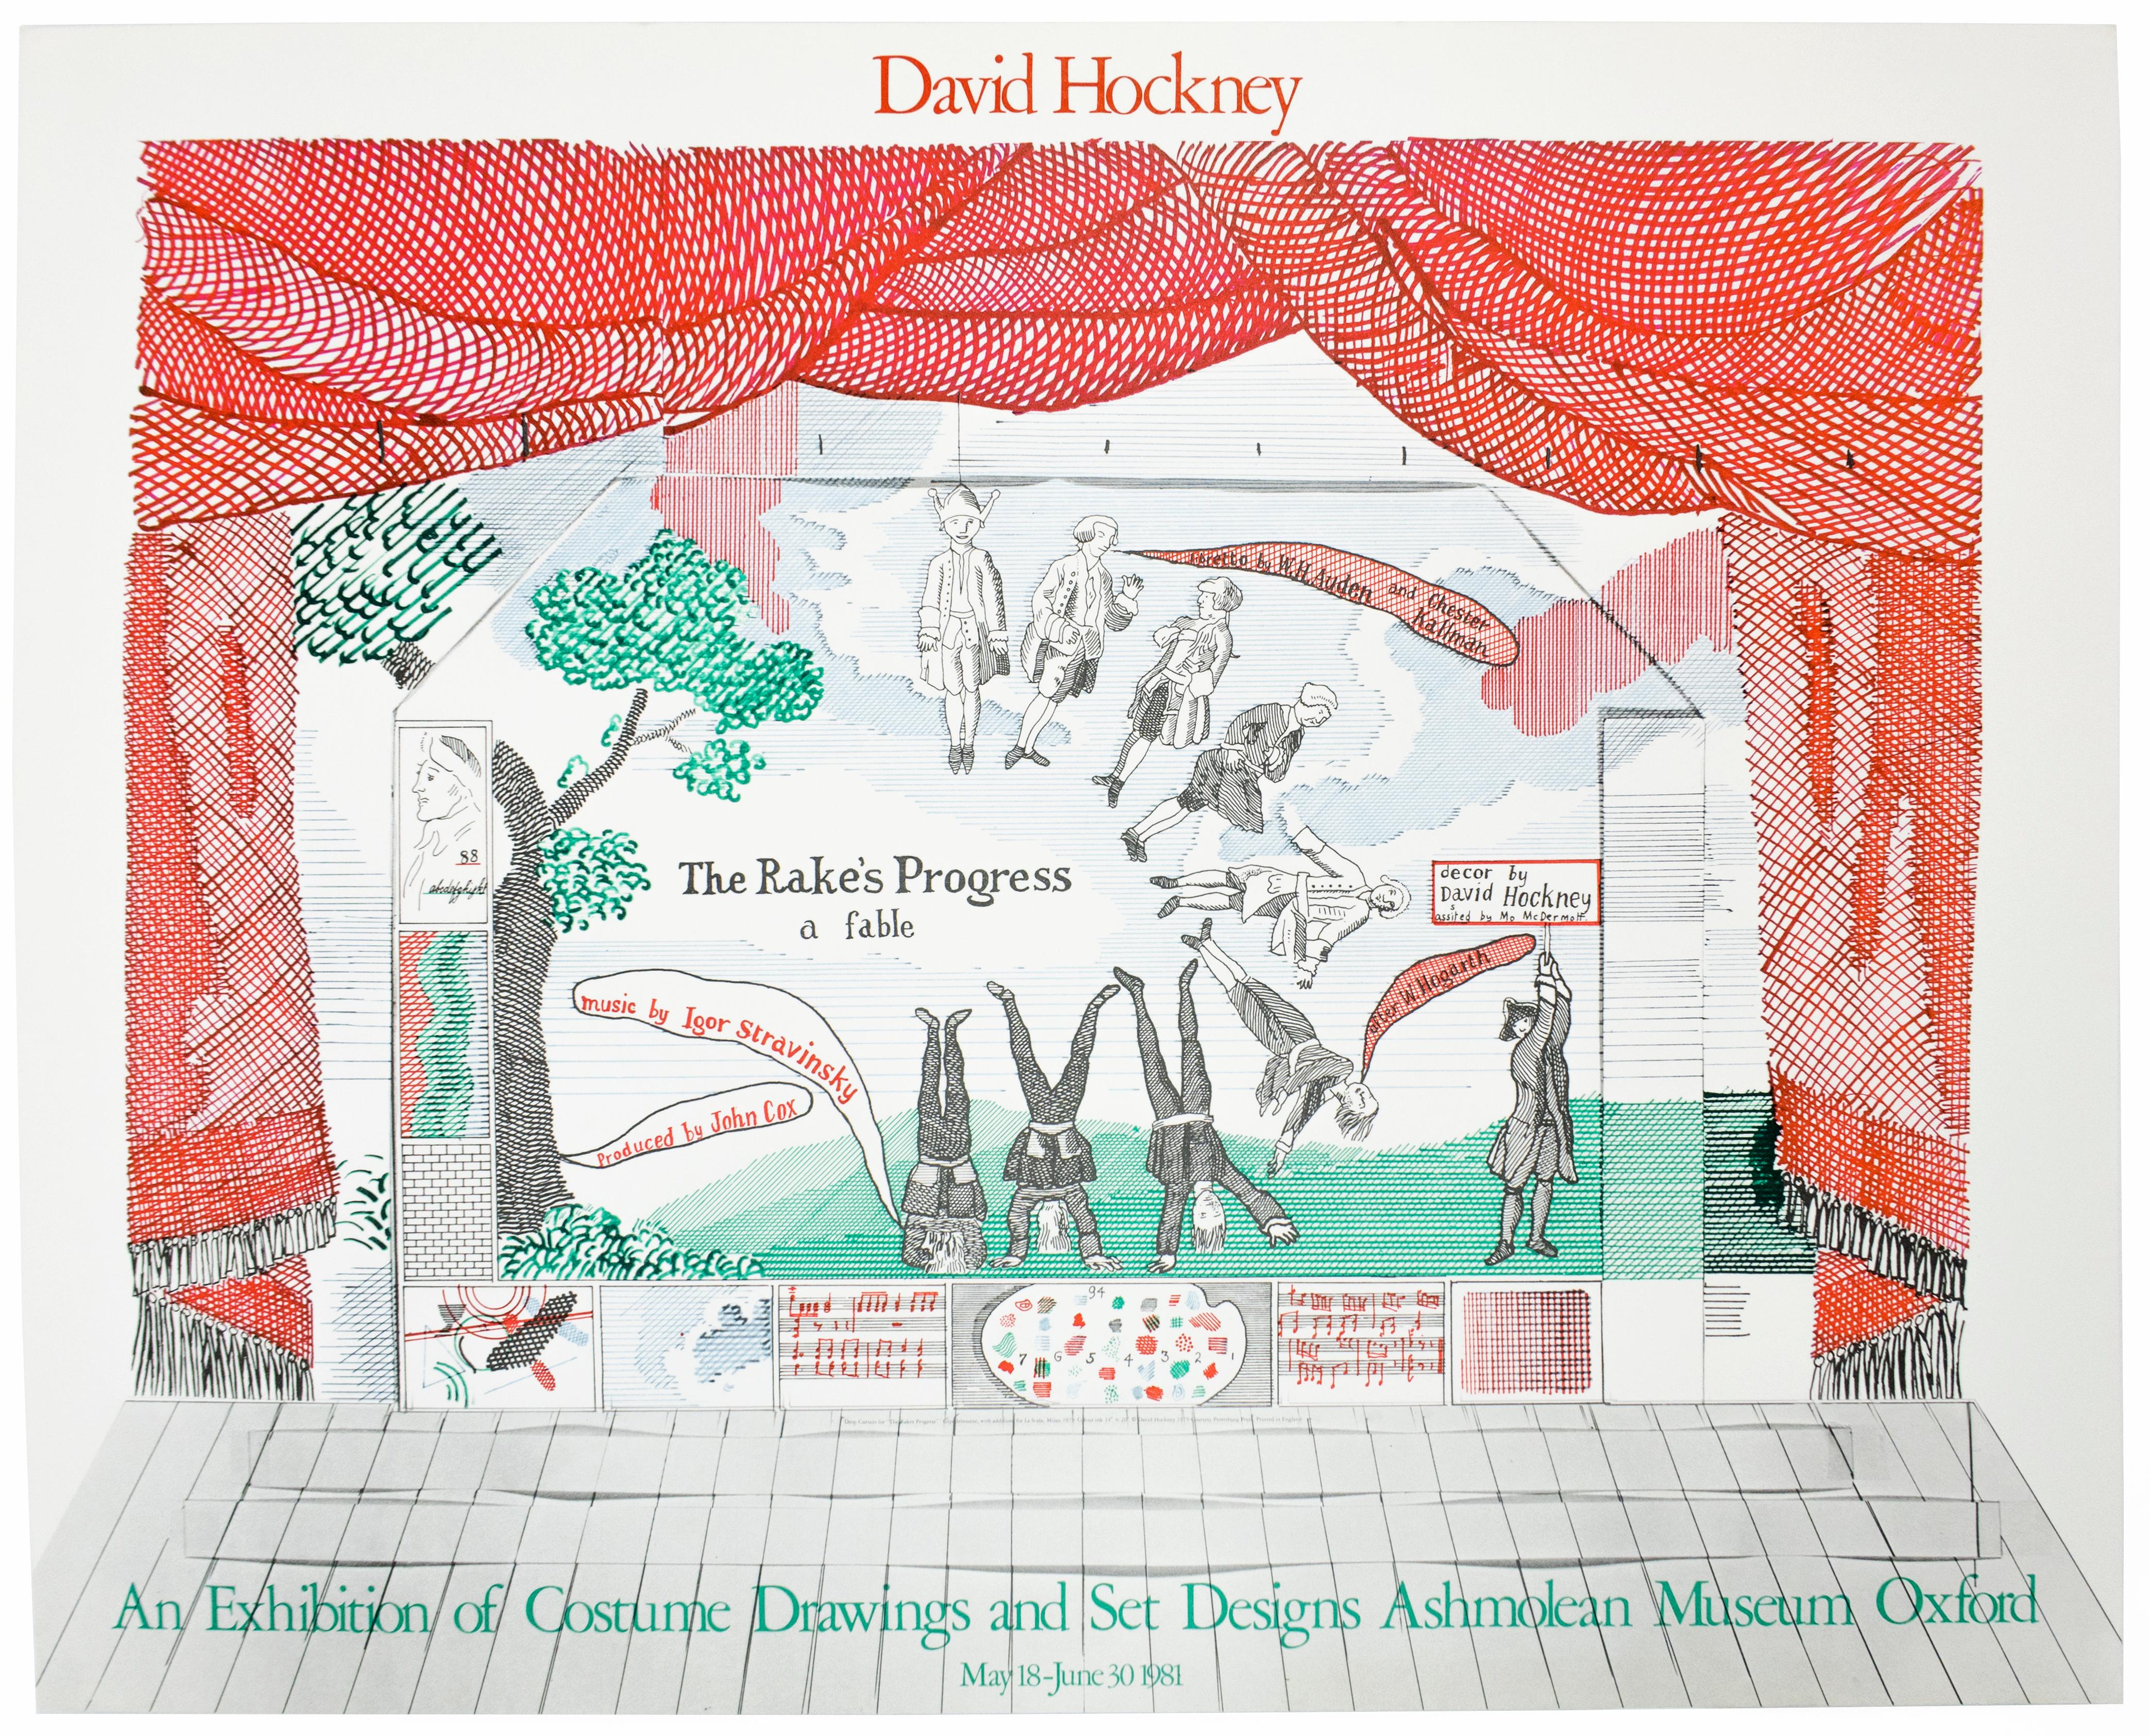 Poster produced for David Hockney’s 1981 exhibition at The Ashmolean Museum, Oxford, which displayed the sets and costumes he designed for the Glyndebourne Festival Opera’s 1975 production of The Rakes Progress. As with Hockney’s 1961-63 etchings, A